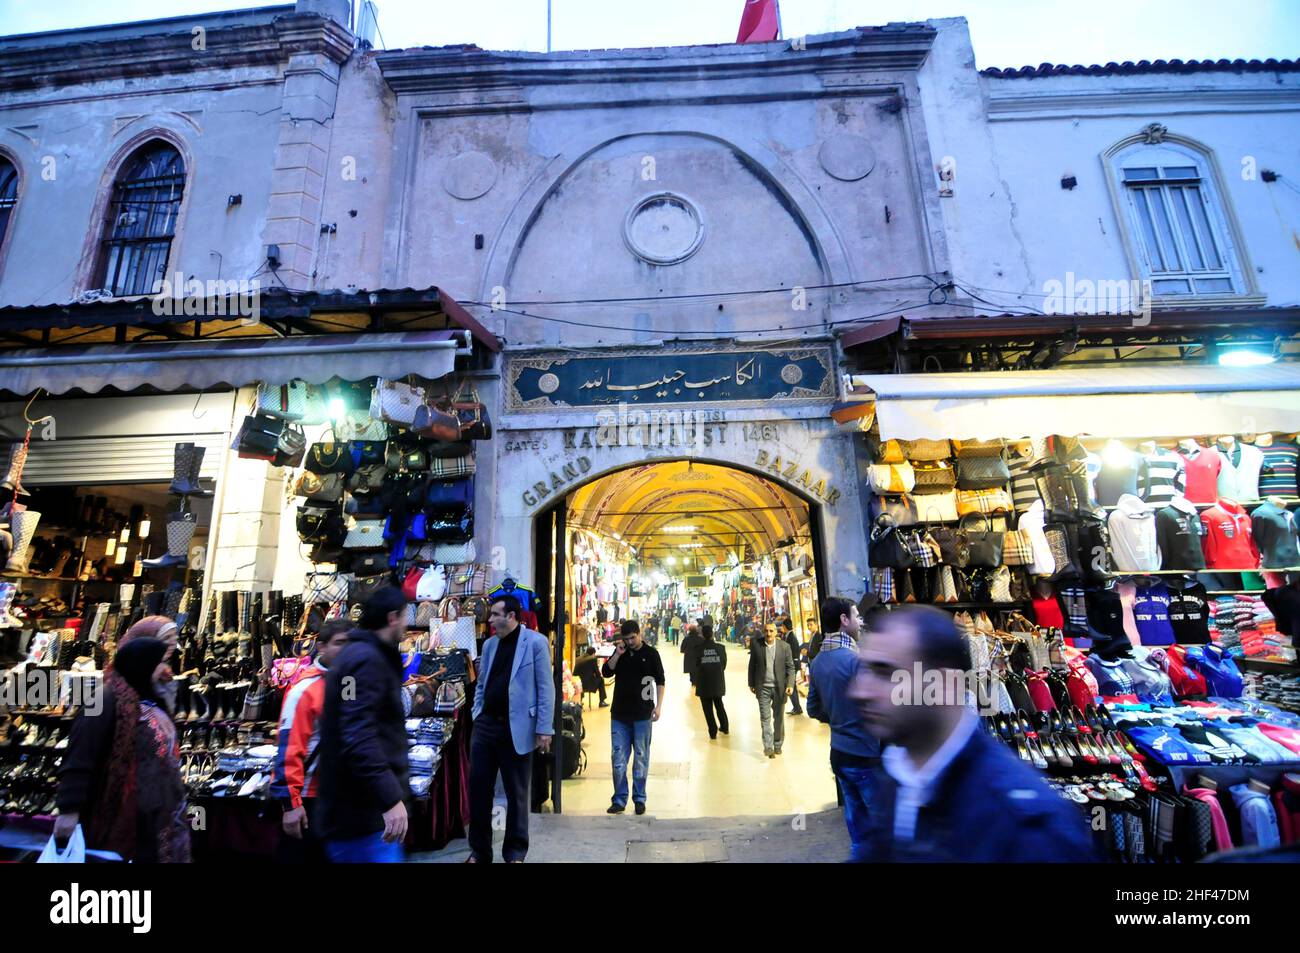 The colorful and vibrant Grand Bazaar in Istanbul, Turkey. Stock Photo